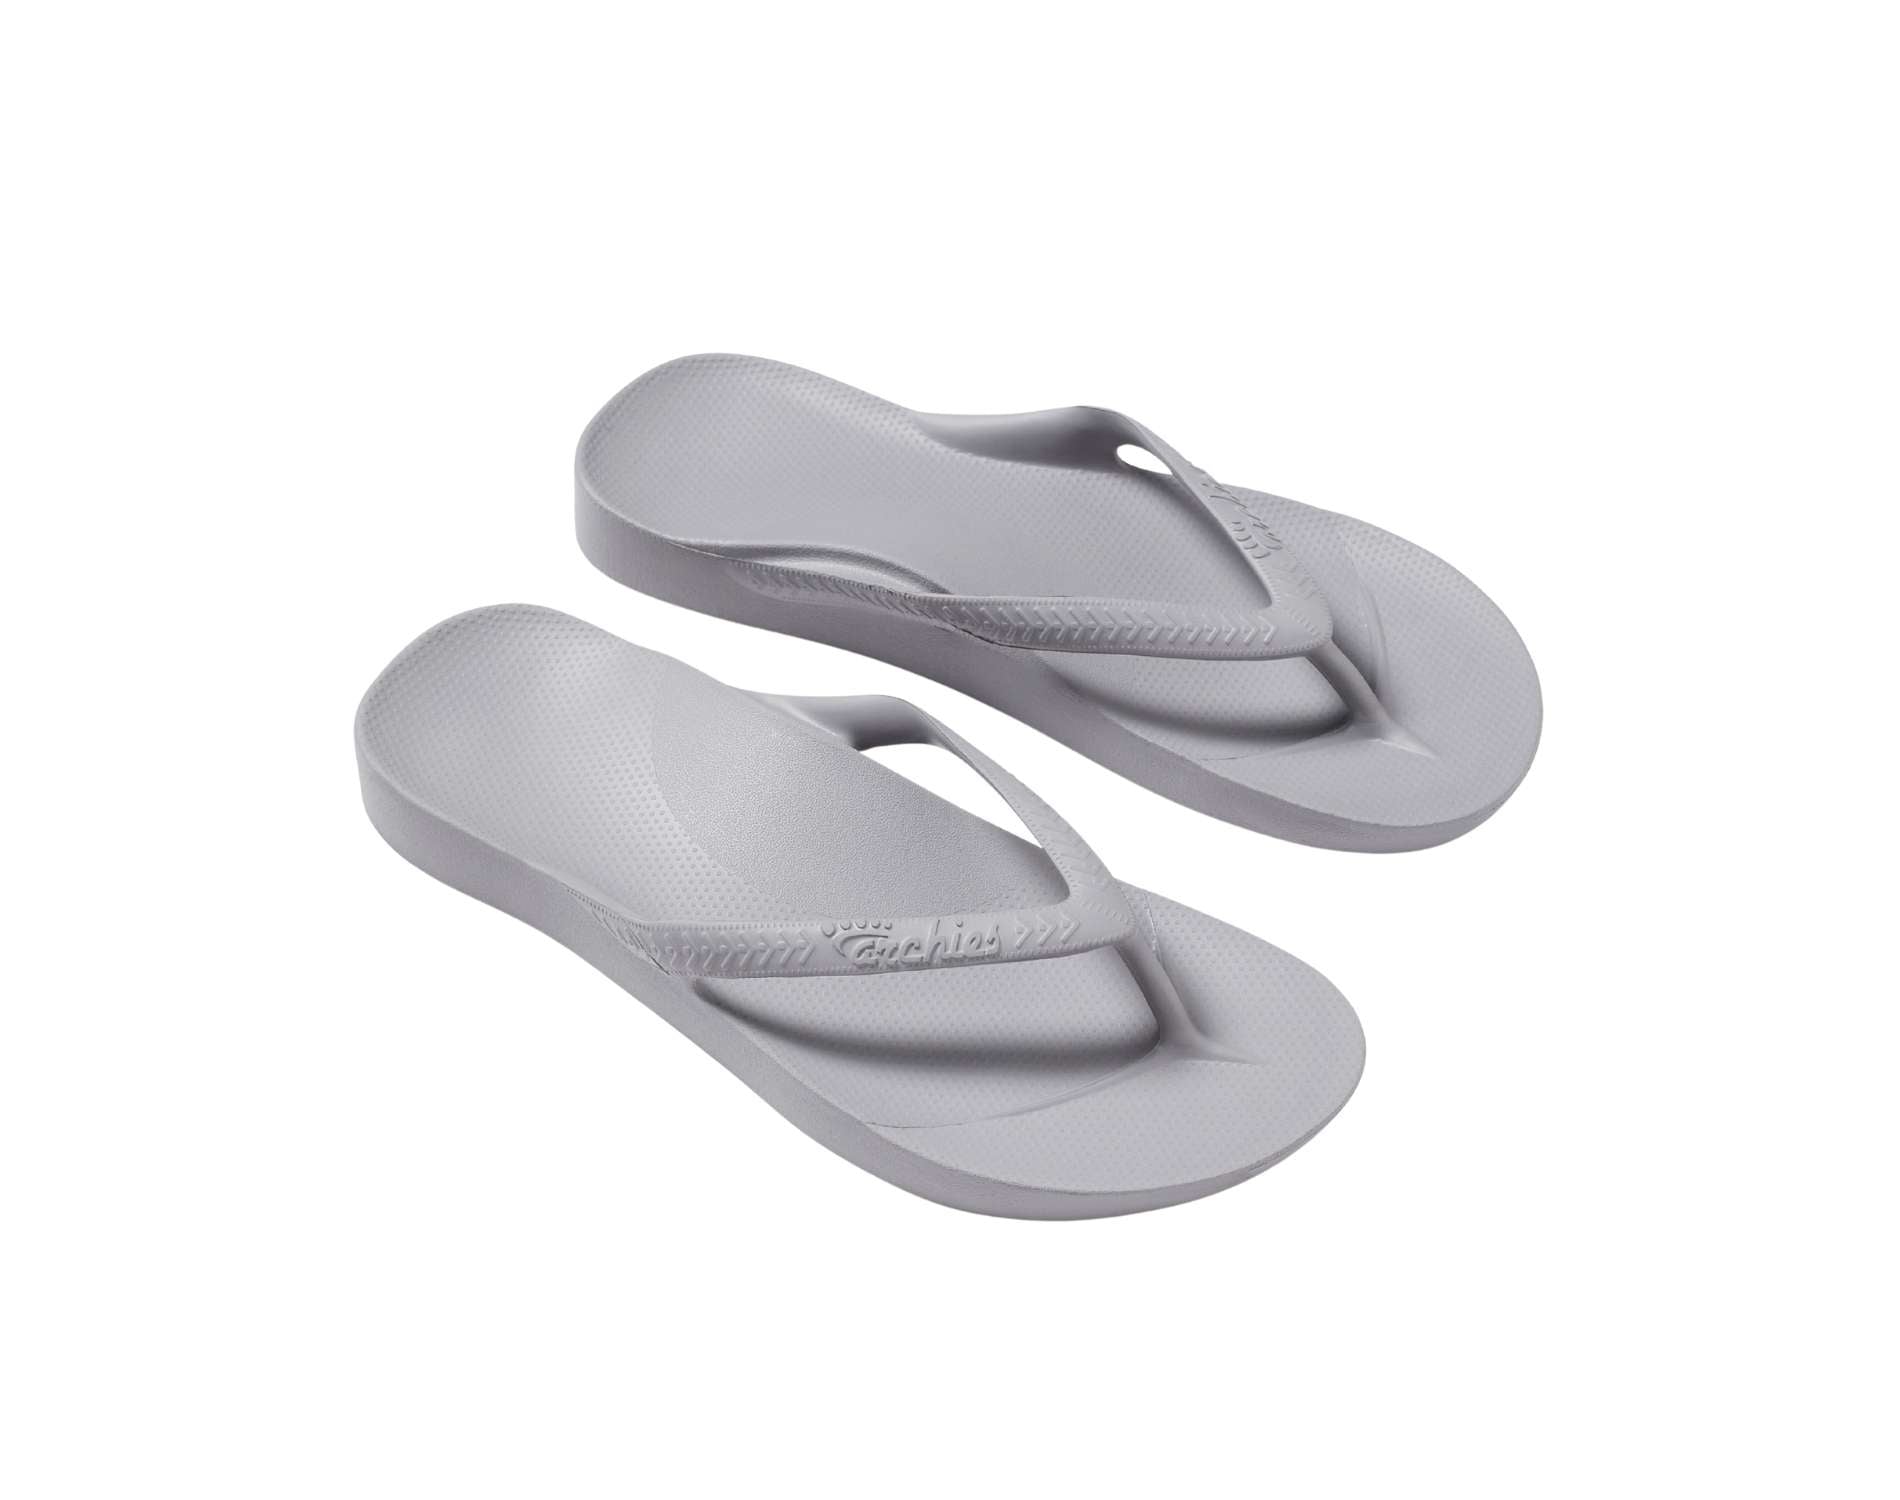 Archies arch support thongs in grey colour